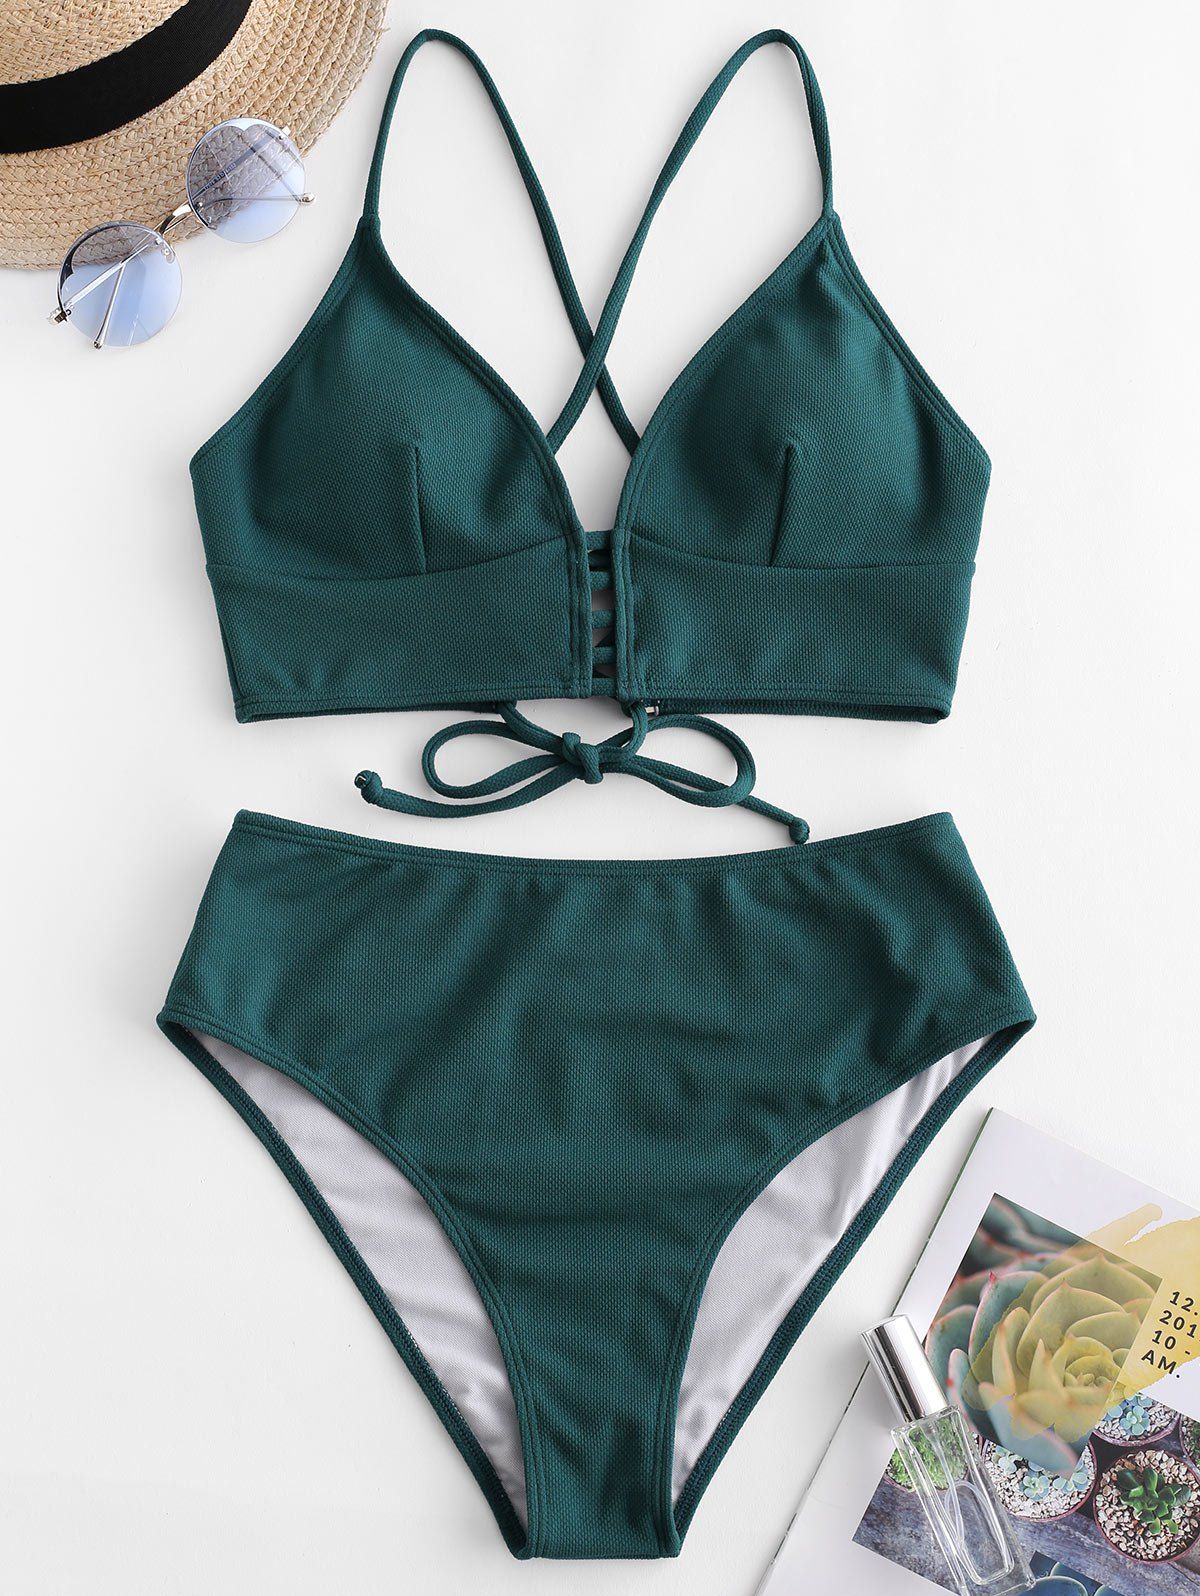 Textured Lace-up High Waisted Tankini Swimsuit - DARK GREEN XL